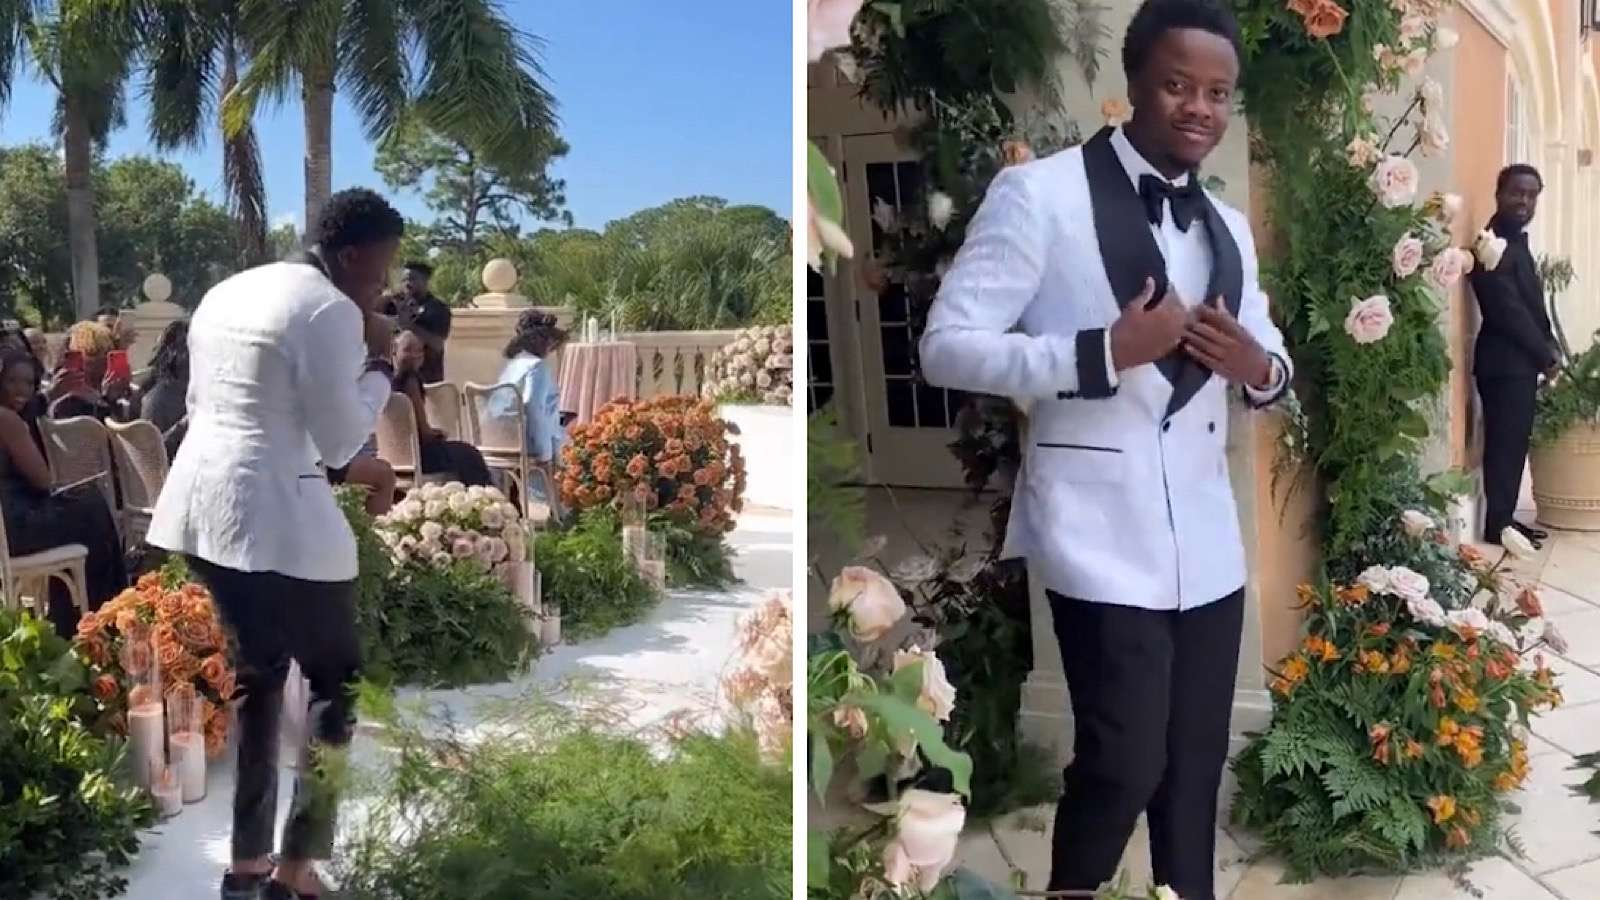 Groom walks down the aisle to a rap song.